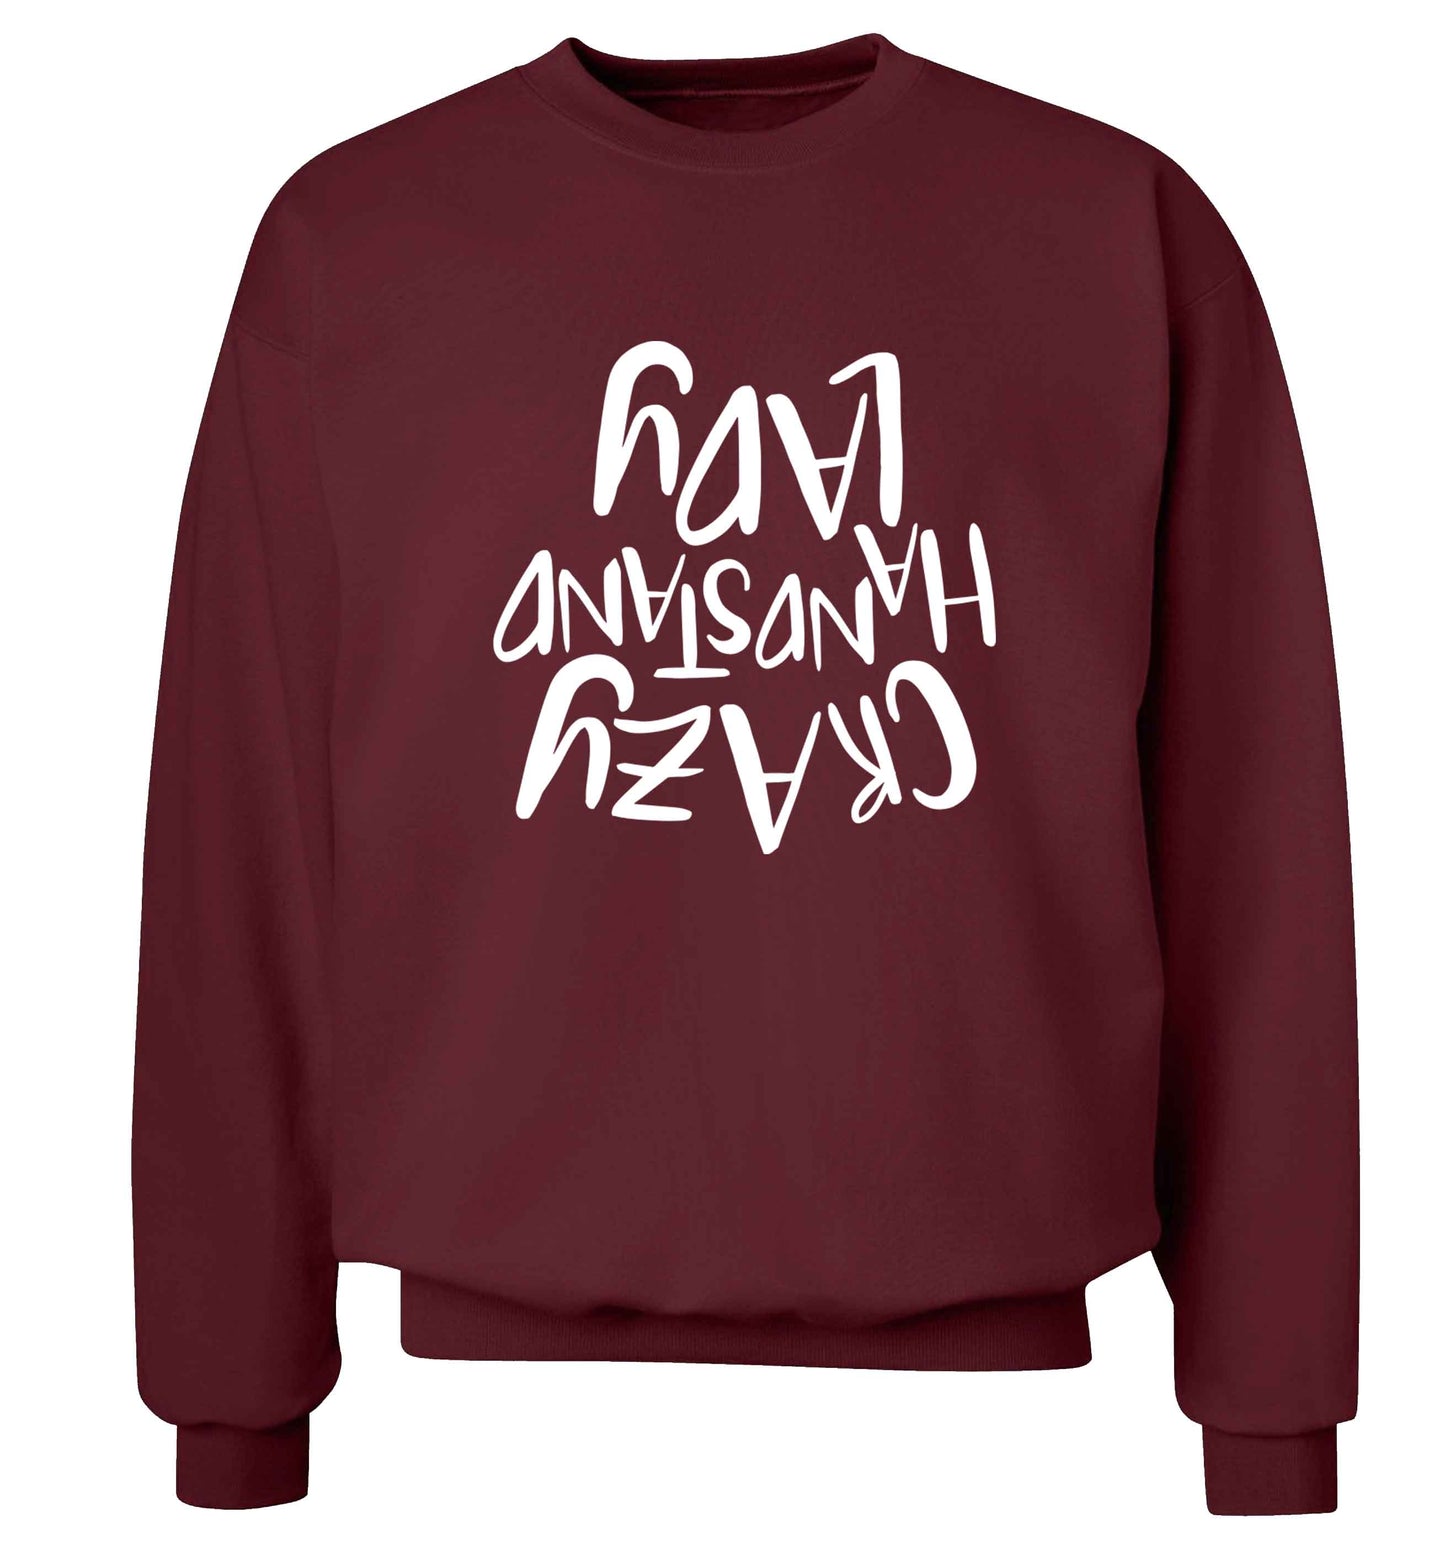 Crazy handstand lady Adult's unisex maroon Sweater 2XL